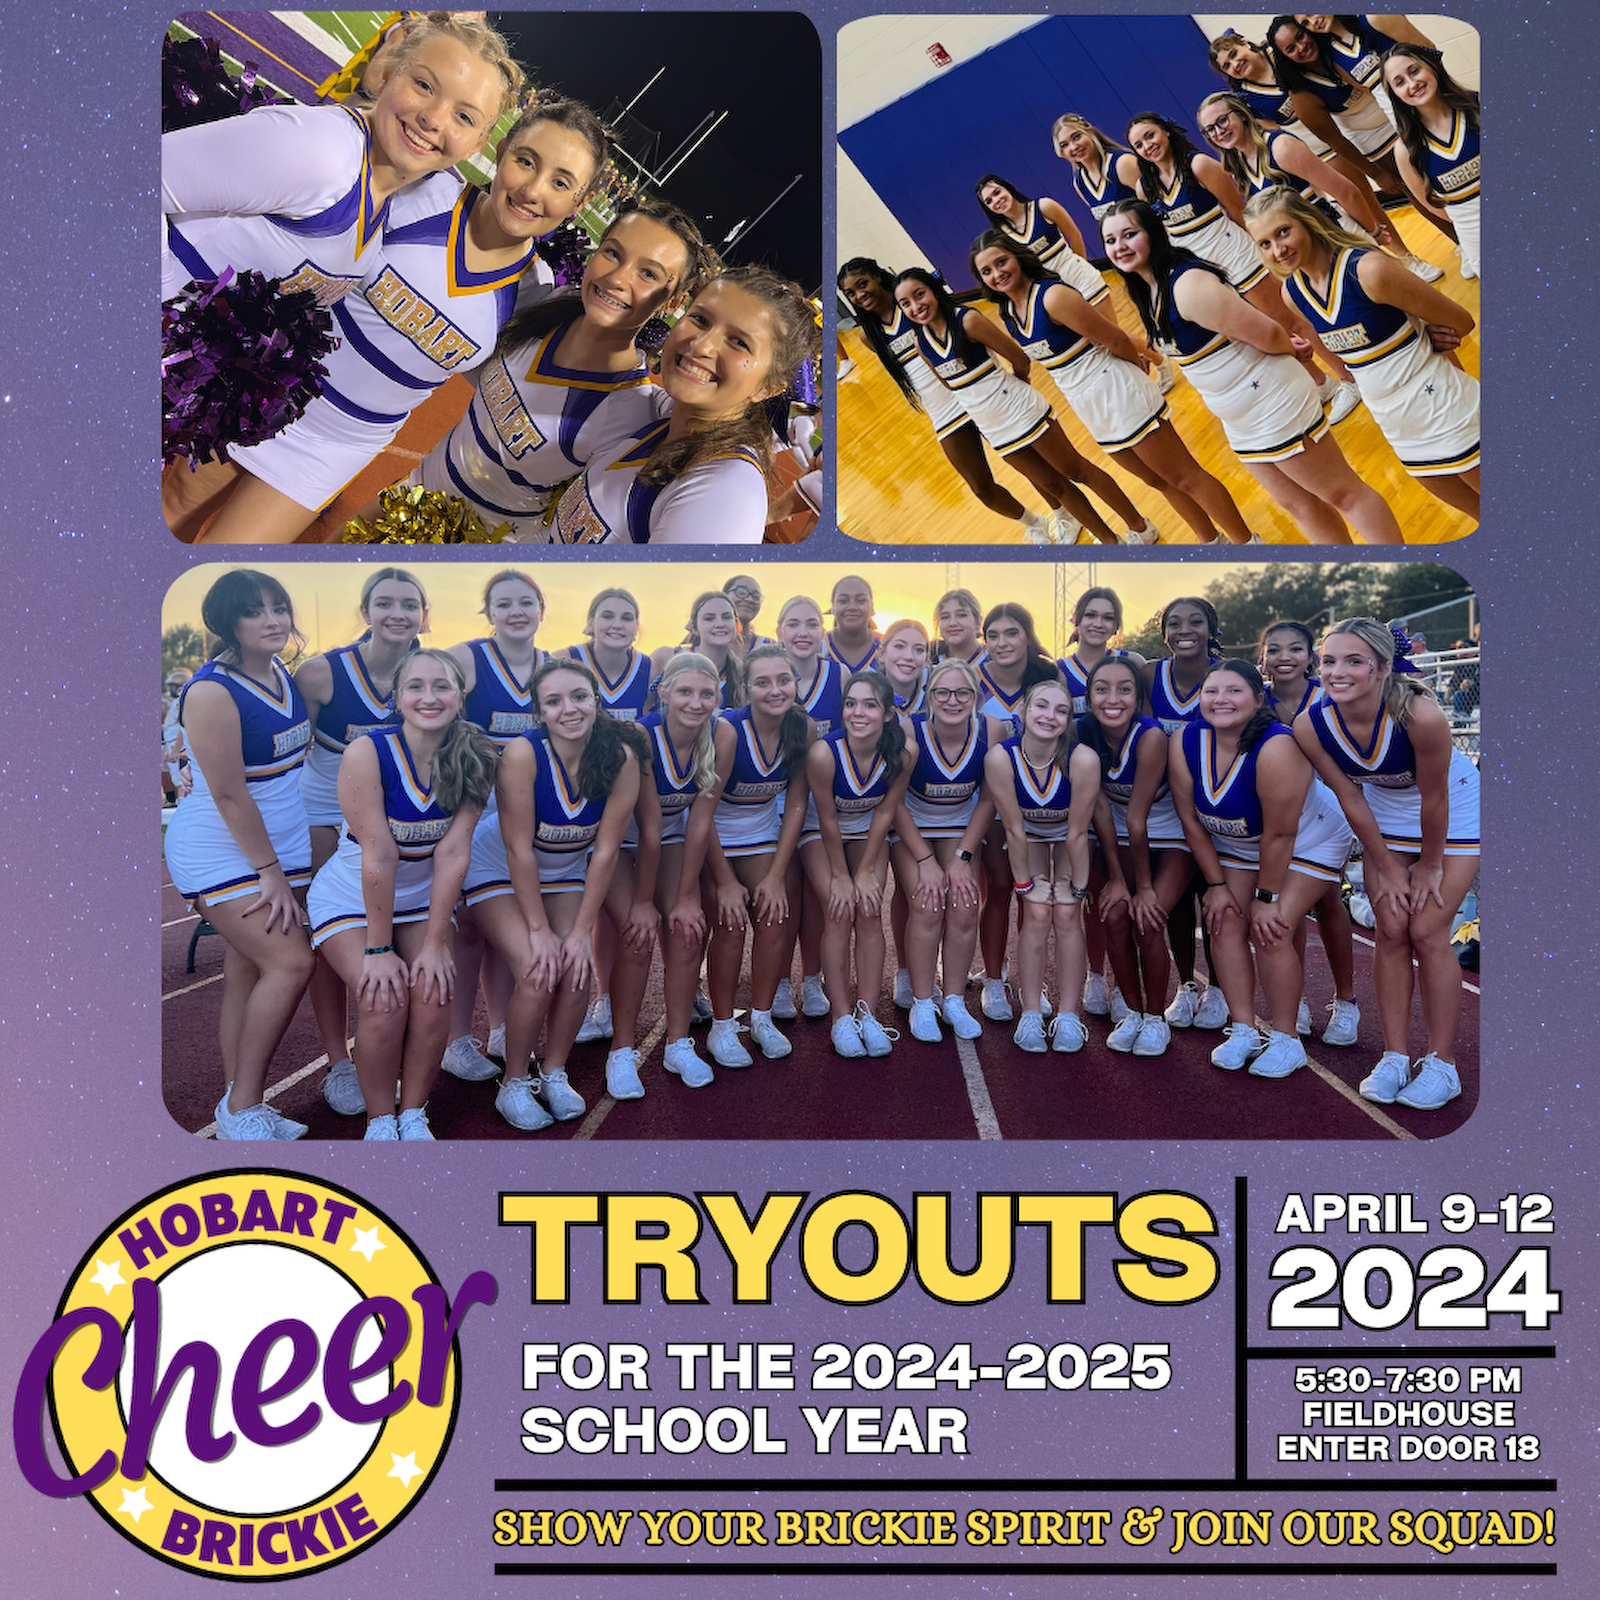 SAVE THE DATE!  2024-2025 CHEER TRYOUTS - APRIL 9-12 gallery cover photo